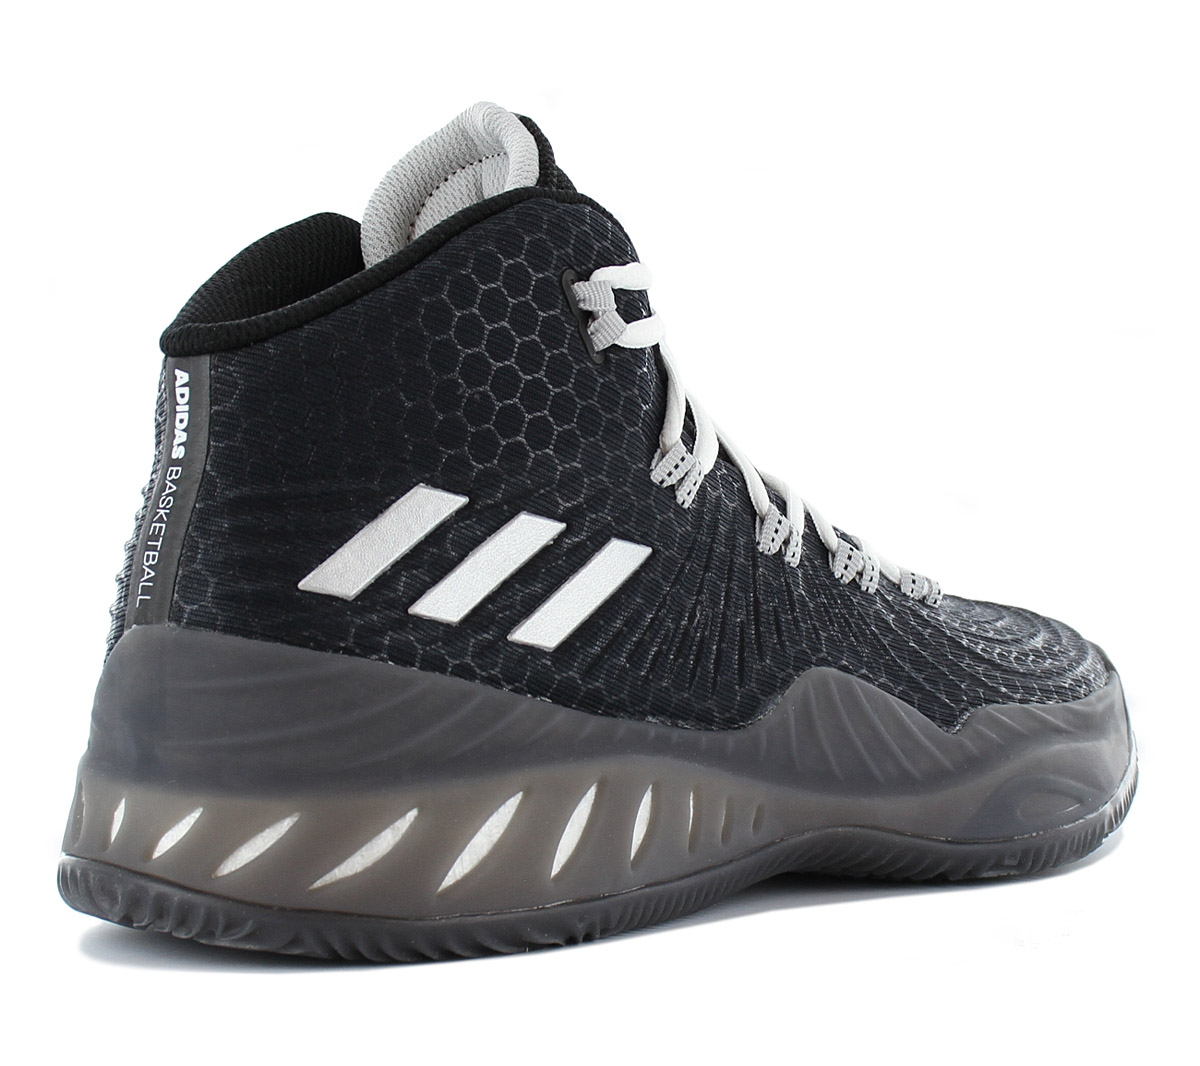 Adidas Crazy Explosive 2017 Boost Men's Basketball Shoes Shoes Shoes ...